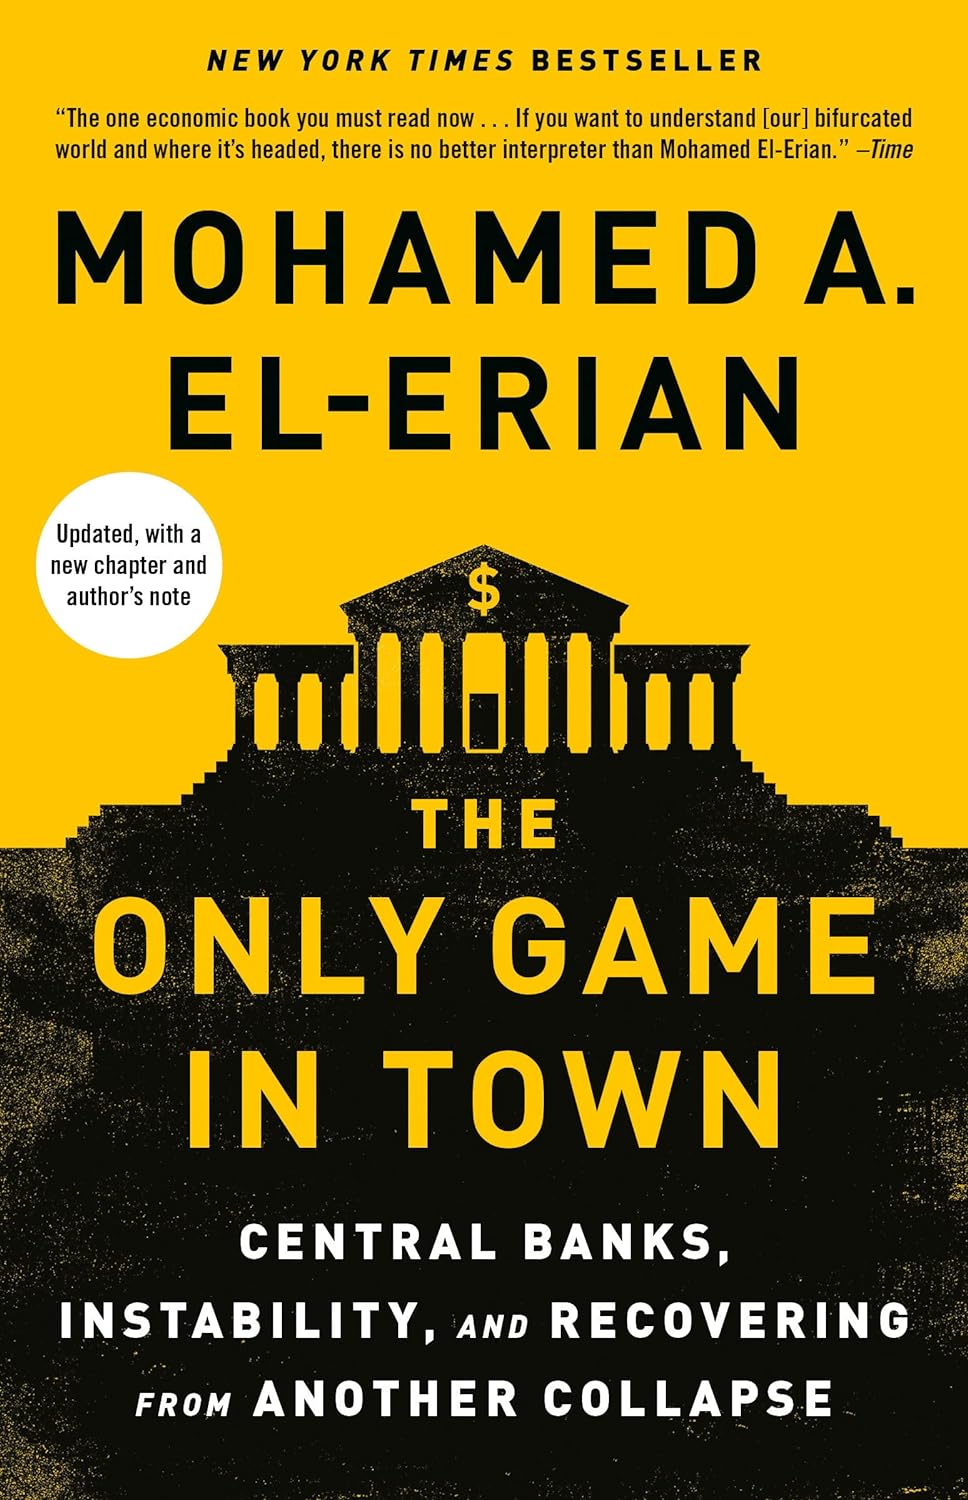 Book cover: "The Only Game in Town."